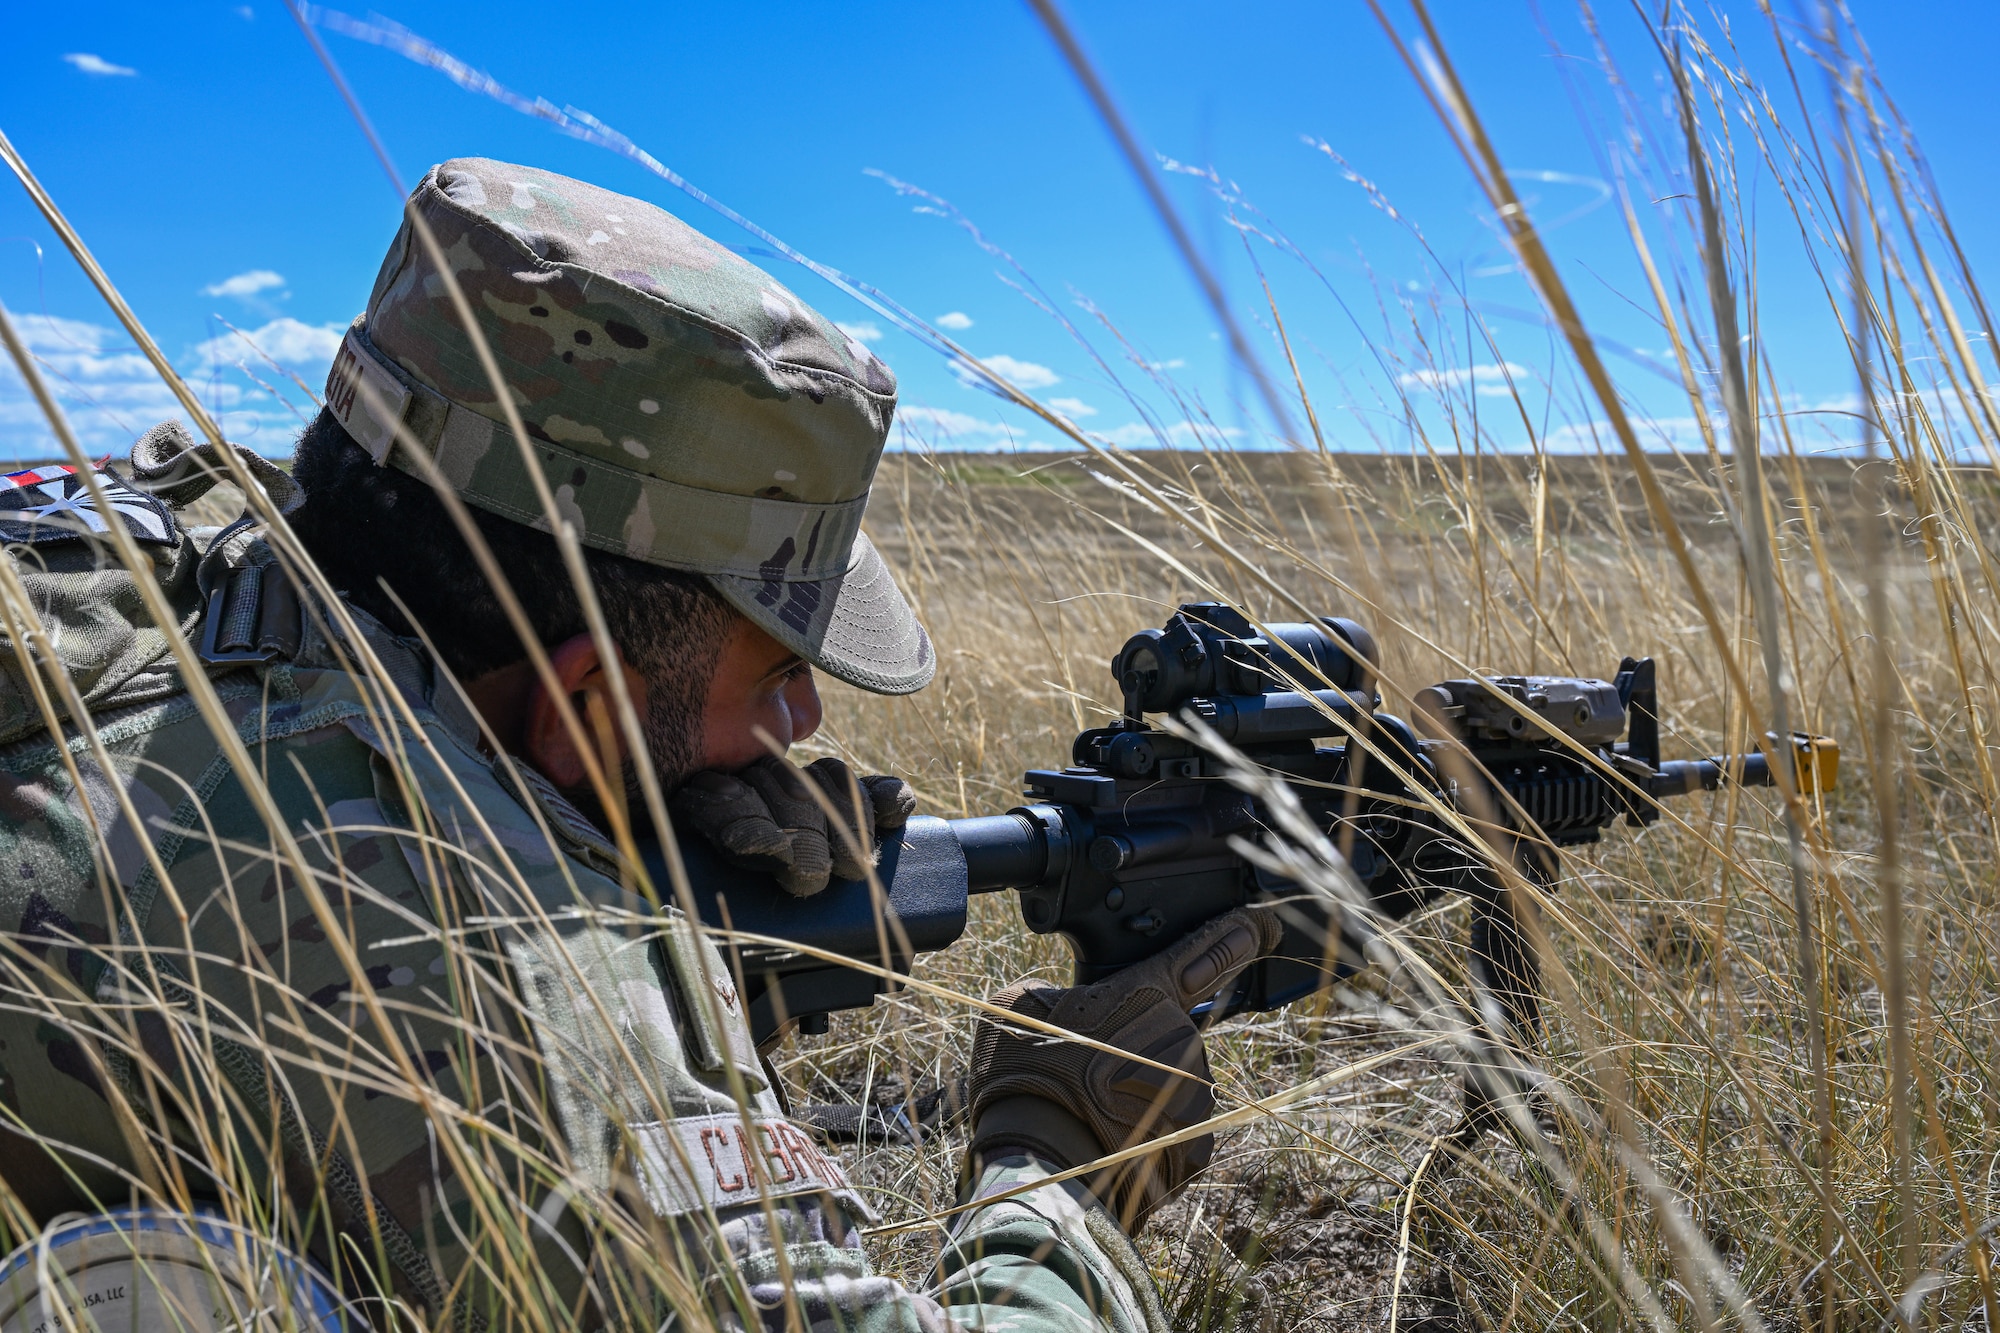 Airman Christopher Cabrera, 91st Missile Security Forces Squadron defender, aims his weapon during Operation Frontier Thunder at Camp Guernsey, Wyoming, Aug. 30, 2023. Cabrera provided overwatch security against simulated adversaries for his team while they traversed the landscape surrounding Camp Guernsey. (U.S. Air Force photo by Airman 1st Class Kyle Wilson)